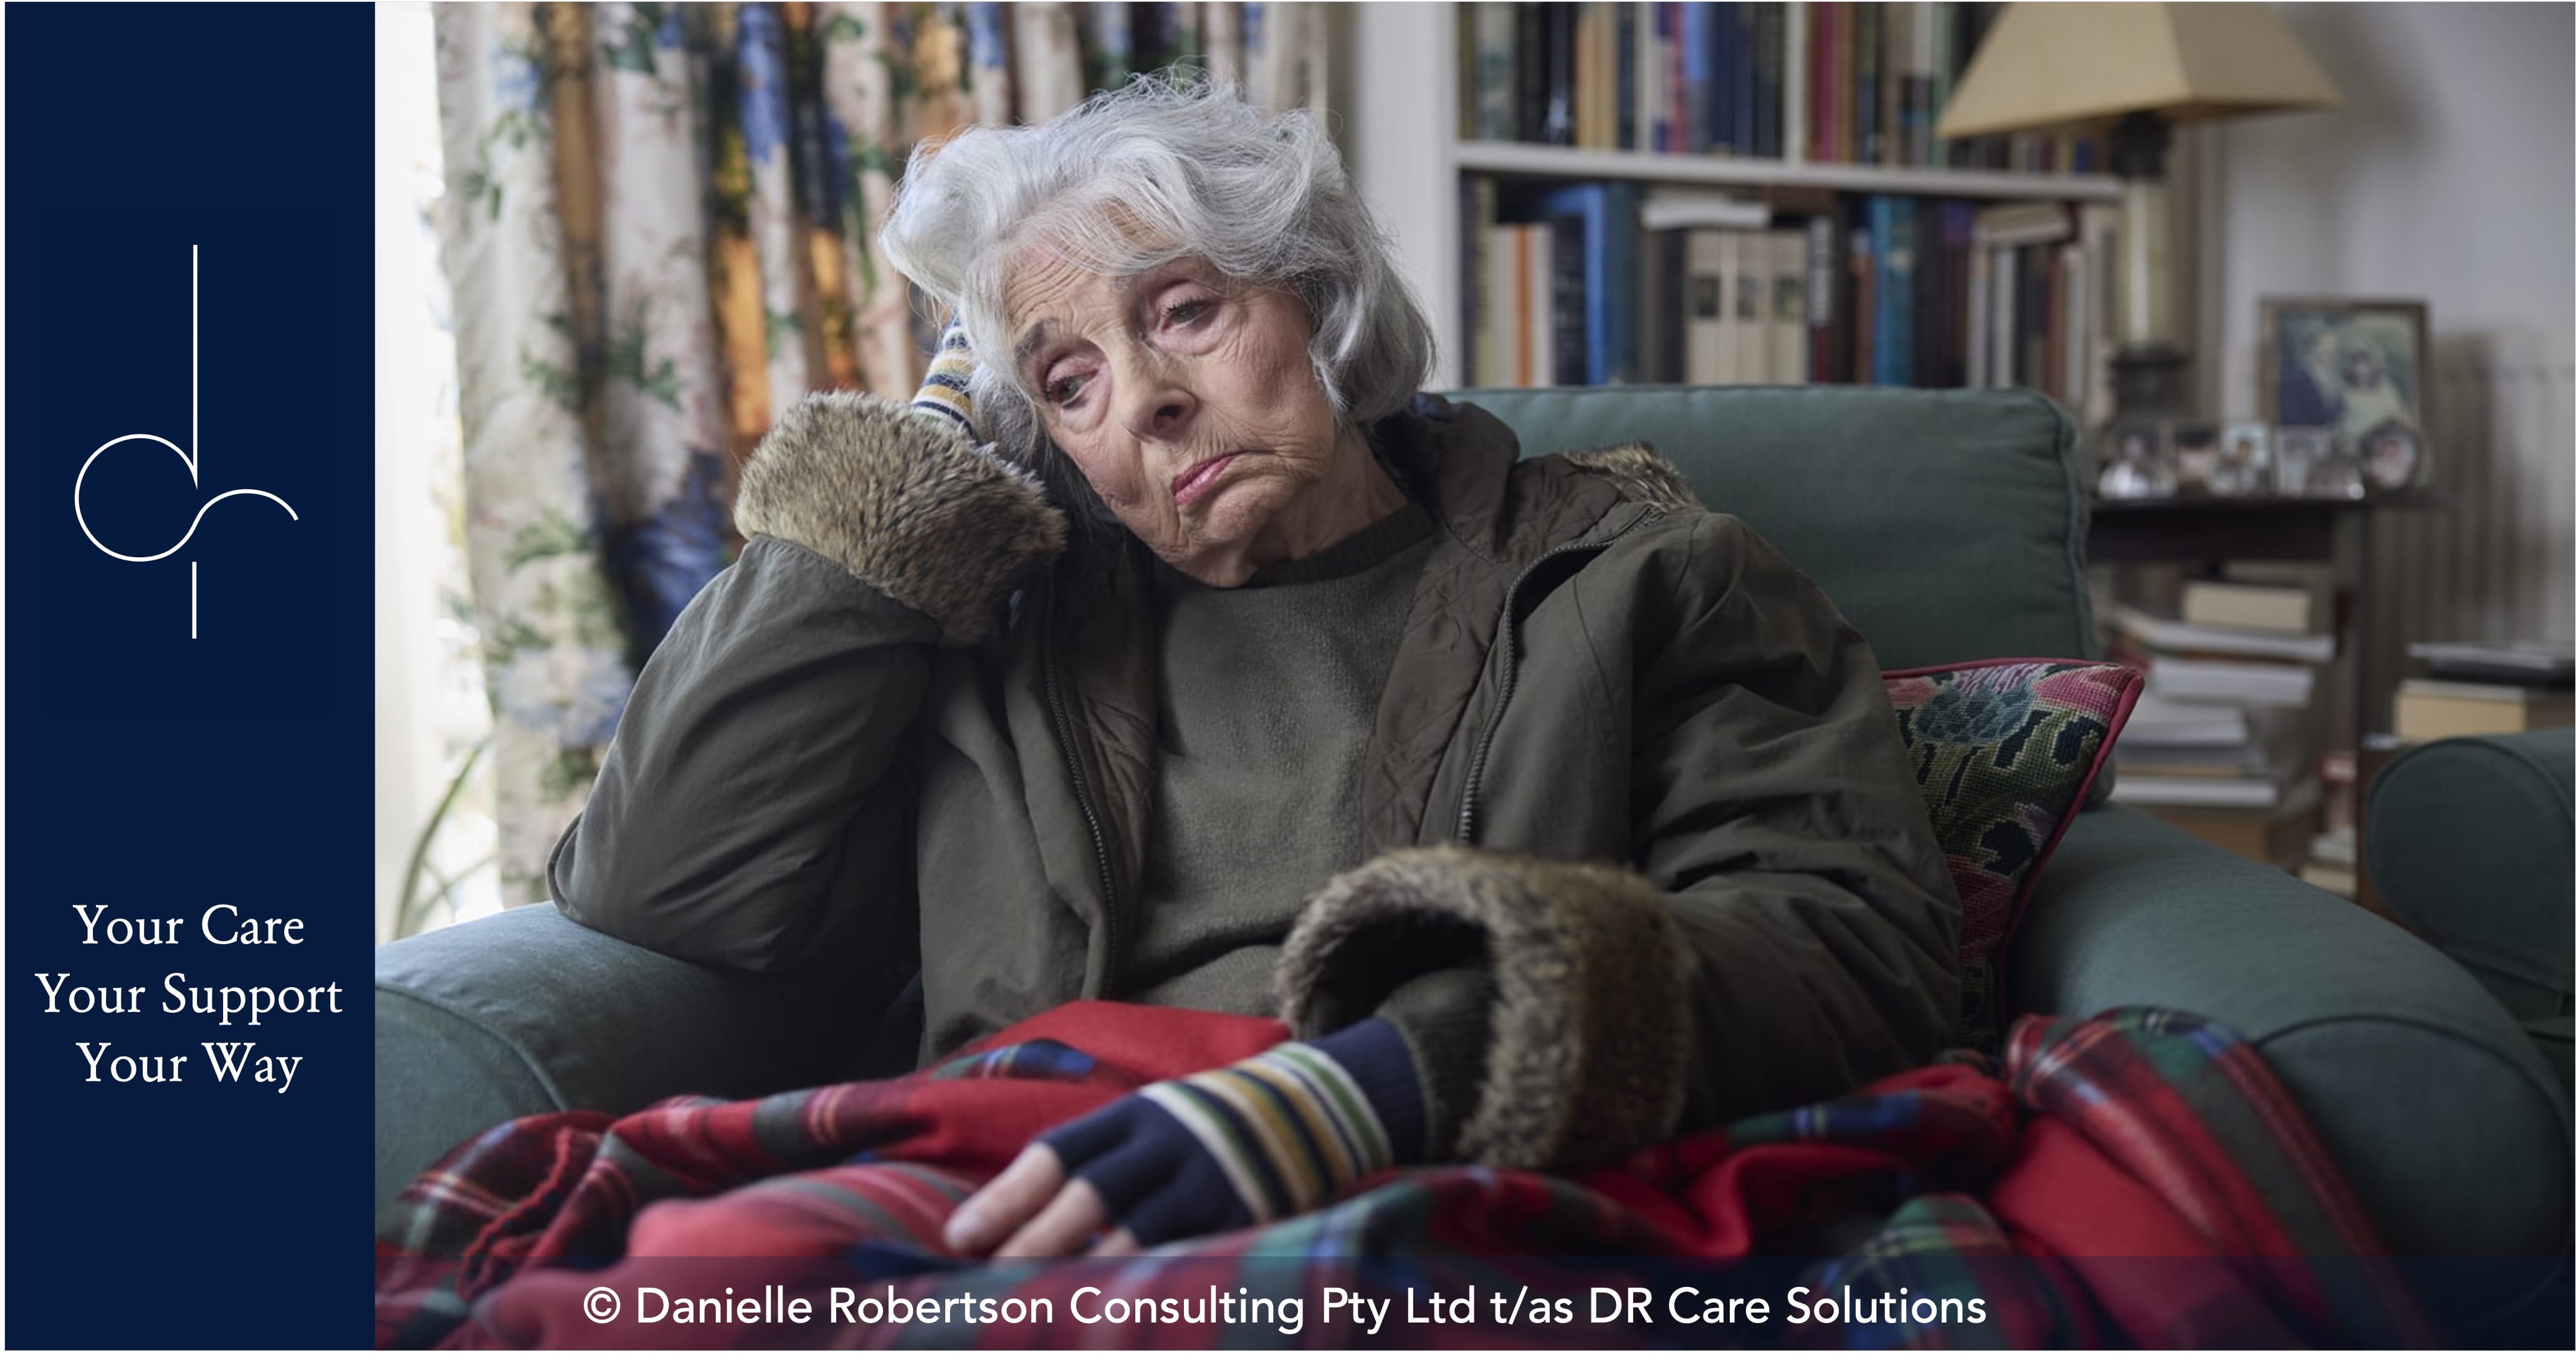 World Elder Abuse Awareness Day: Crossing The Line As A Carer